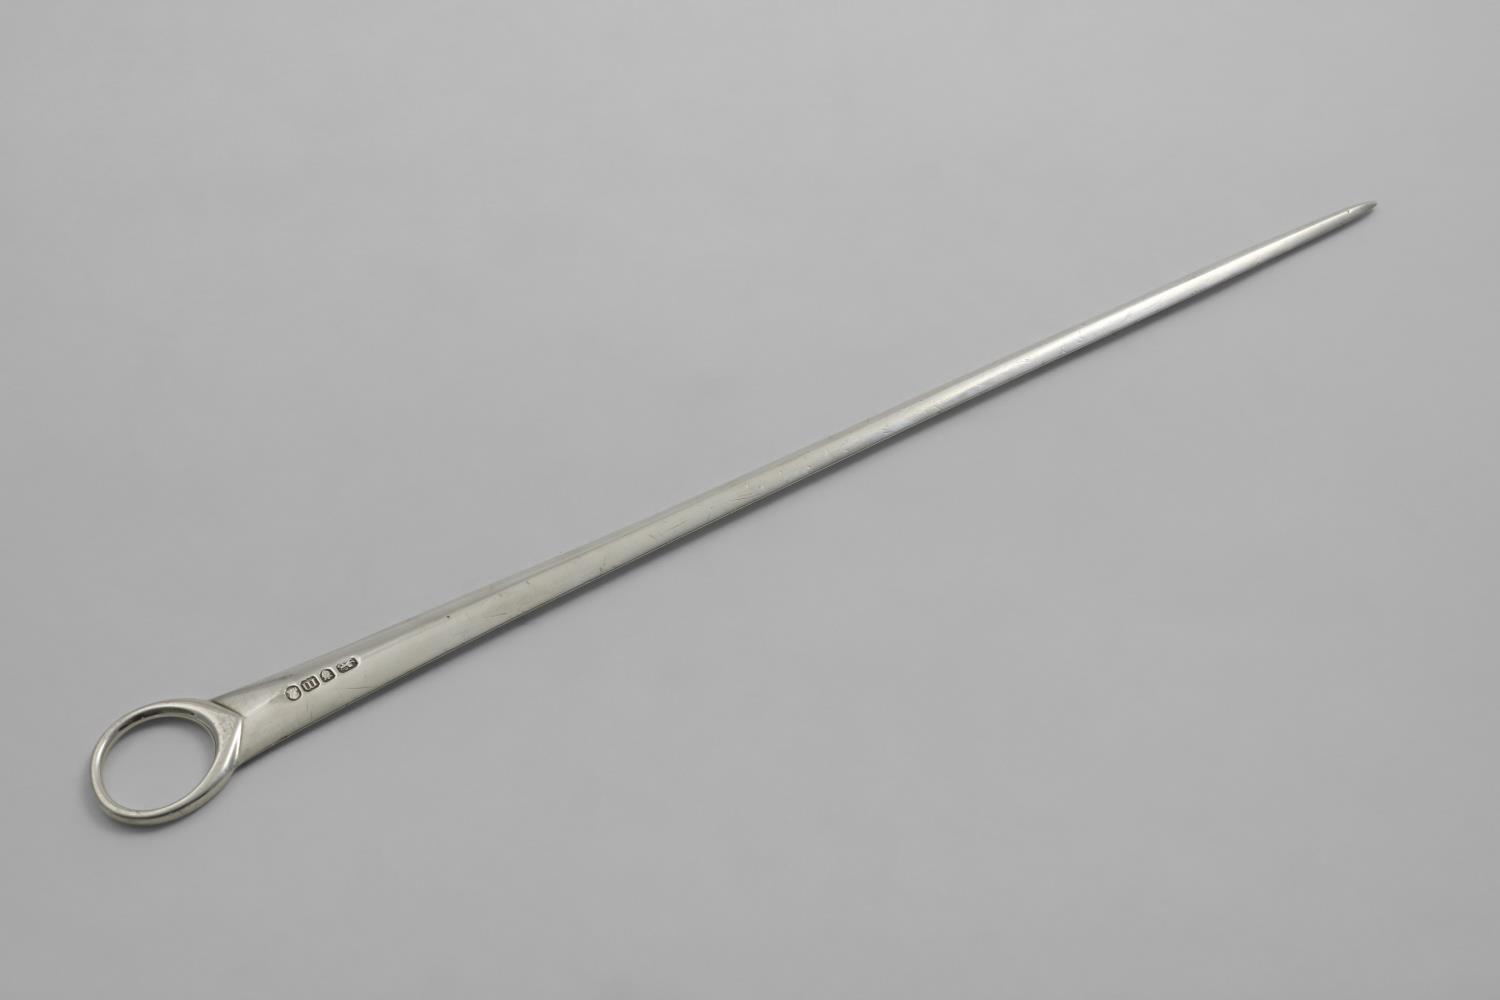 A GEORGE III MEAT SKEWER with a ring handle, maker's mark unclear, London 1787; 13.4" (34 cms) long;